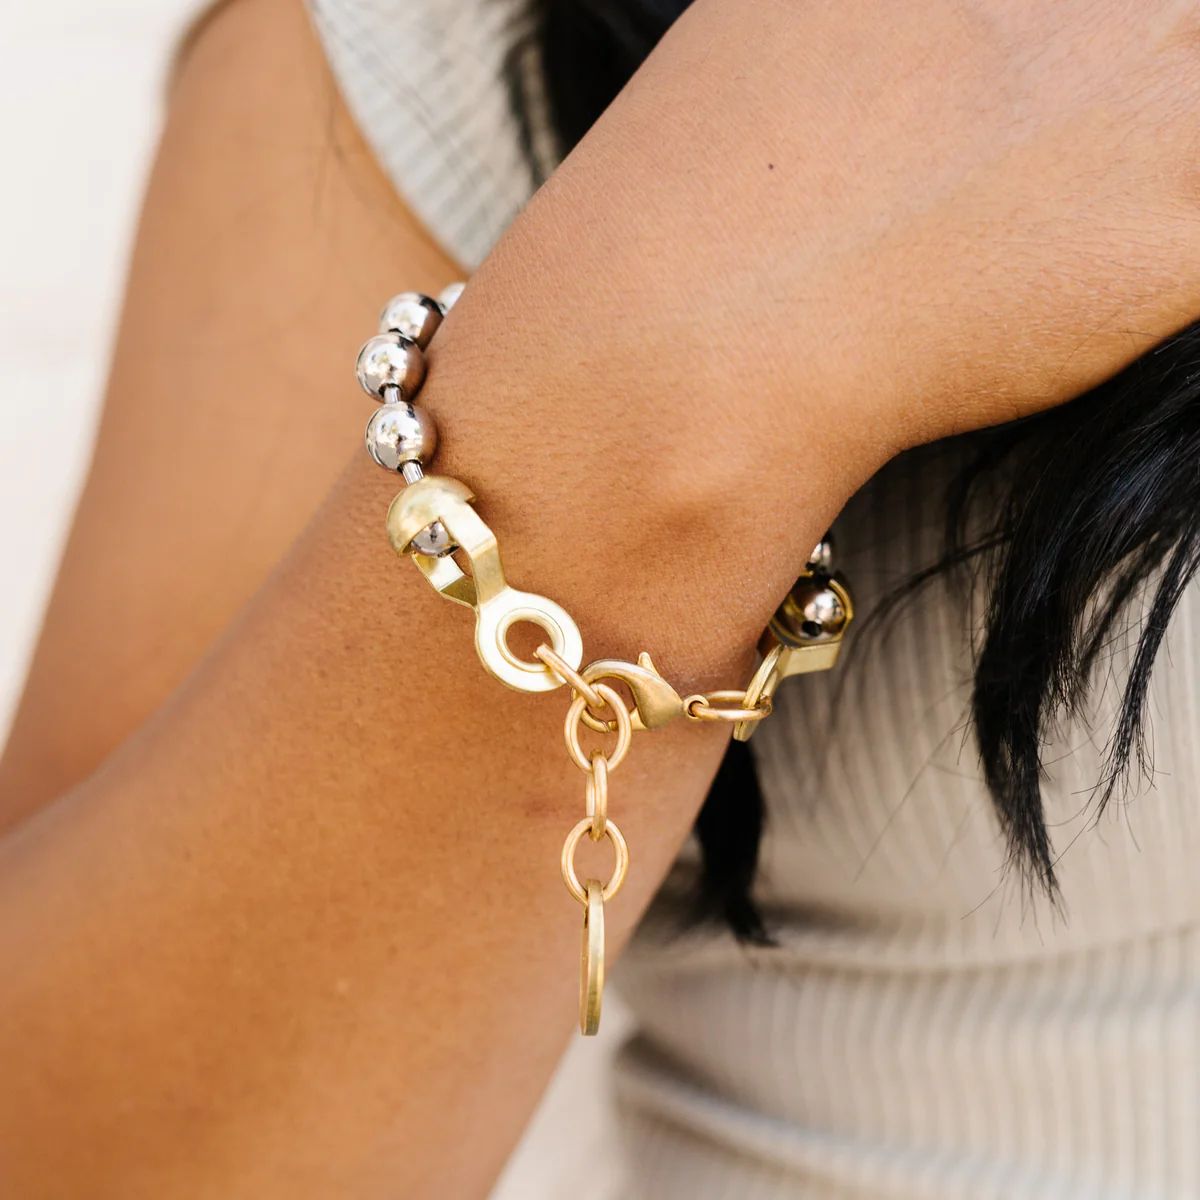 BALL & CHAIN Bracelet | Twisted Silver